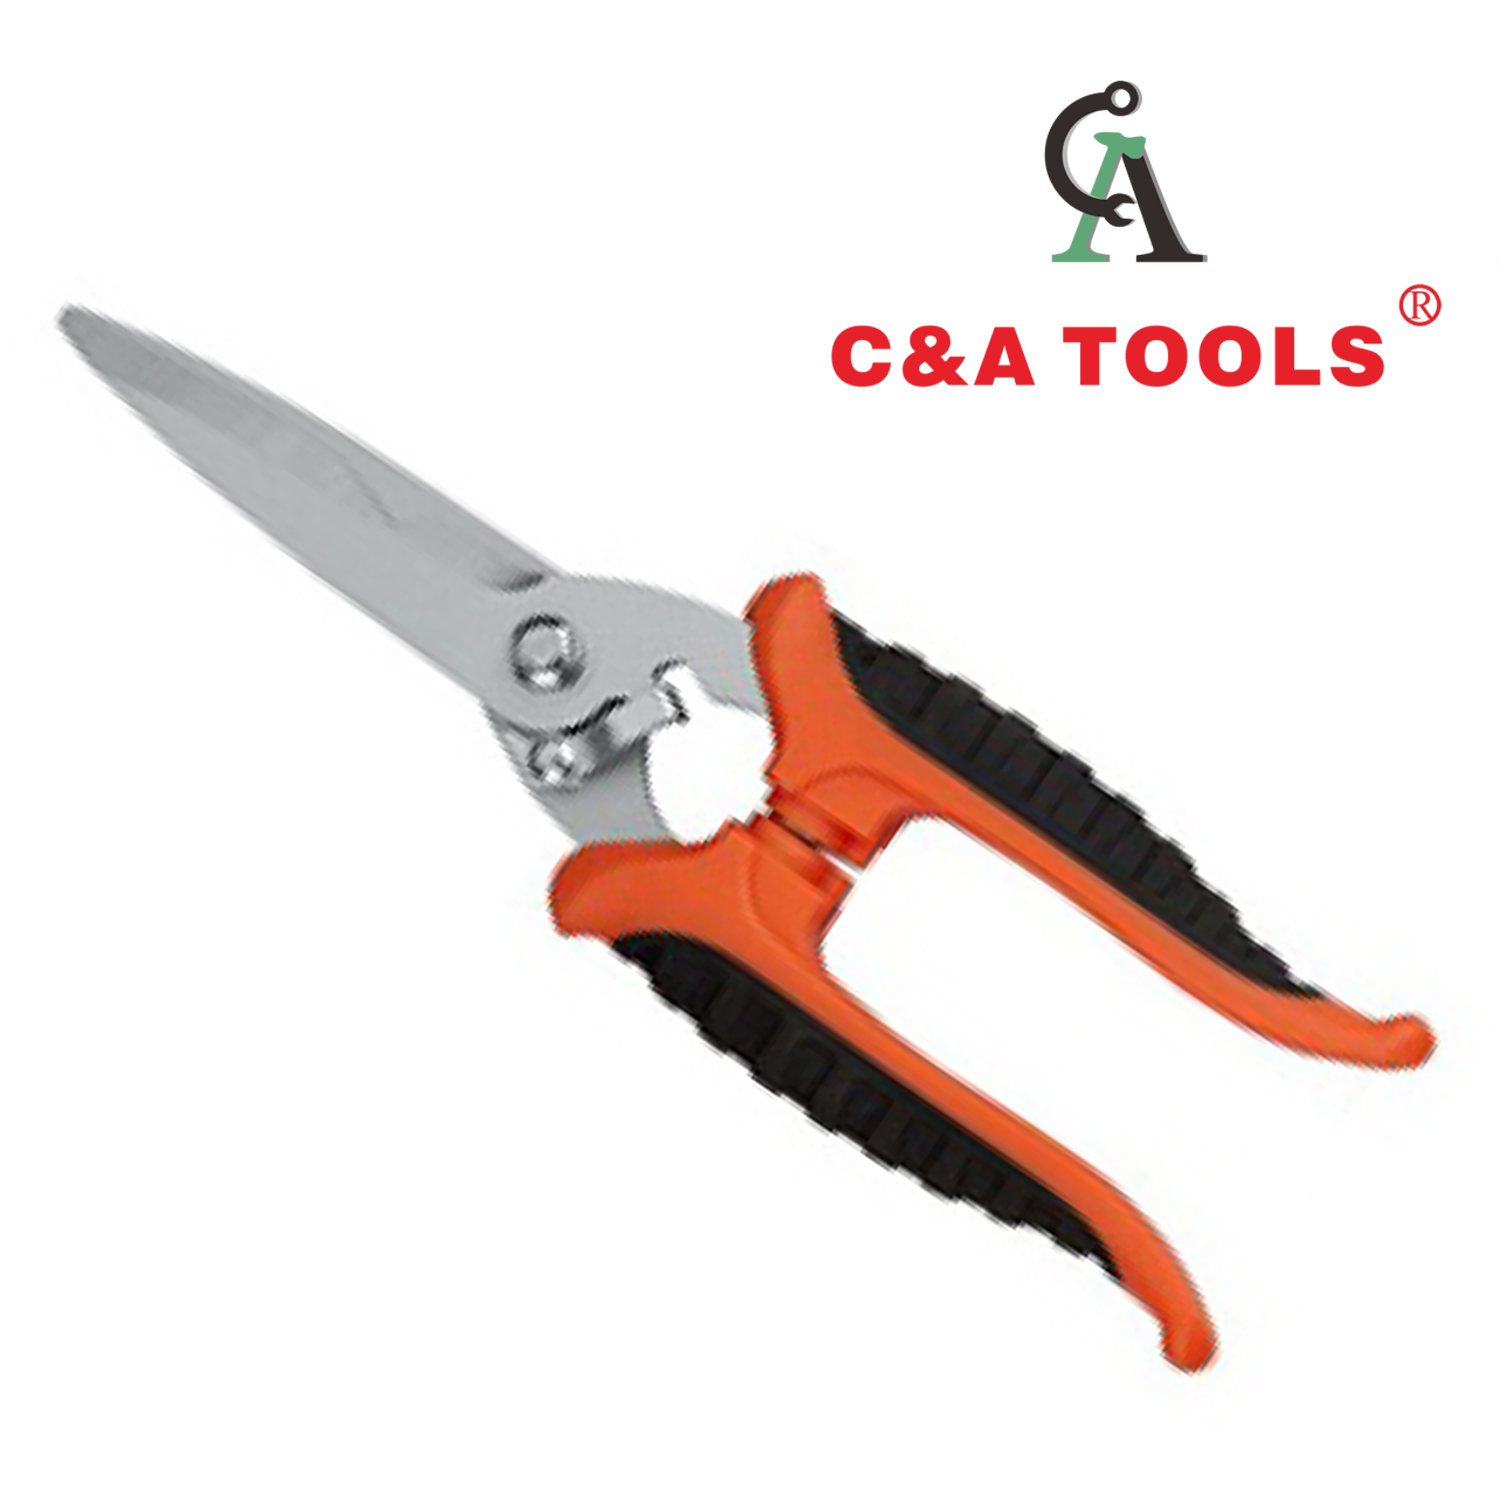 Is The Pruning Shear Thicker Or Thinner?